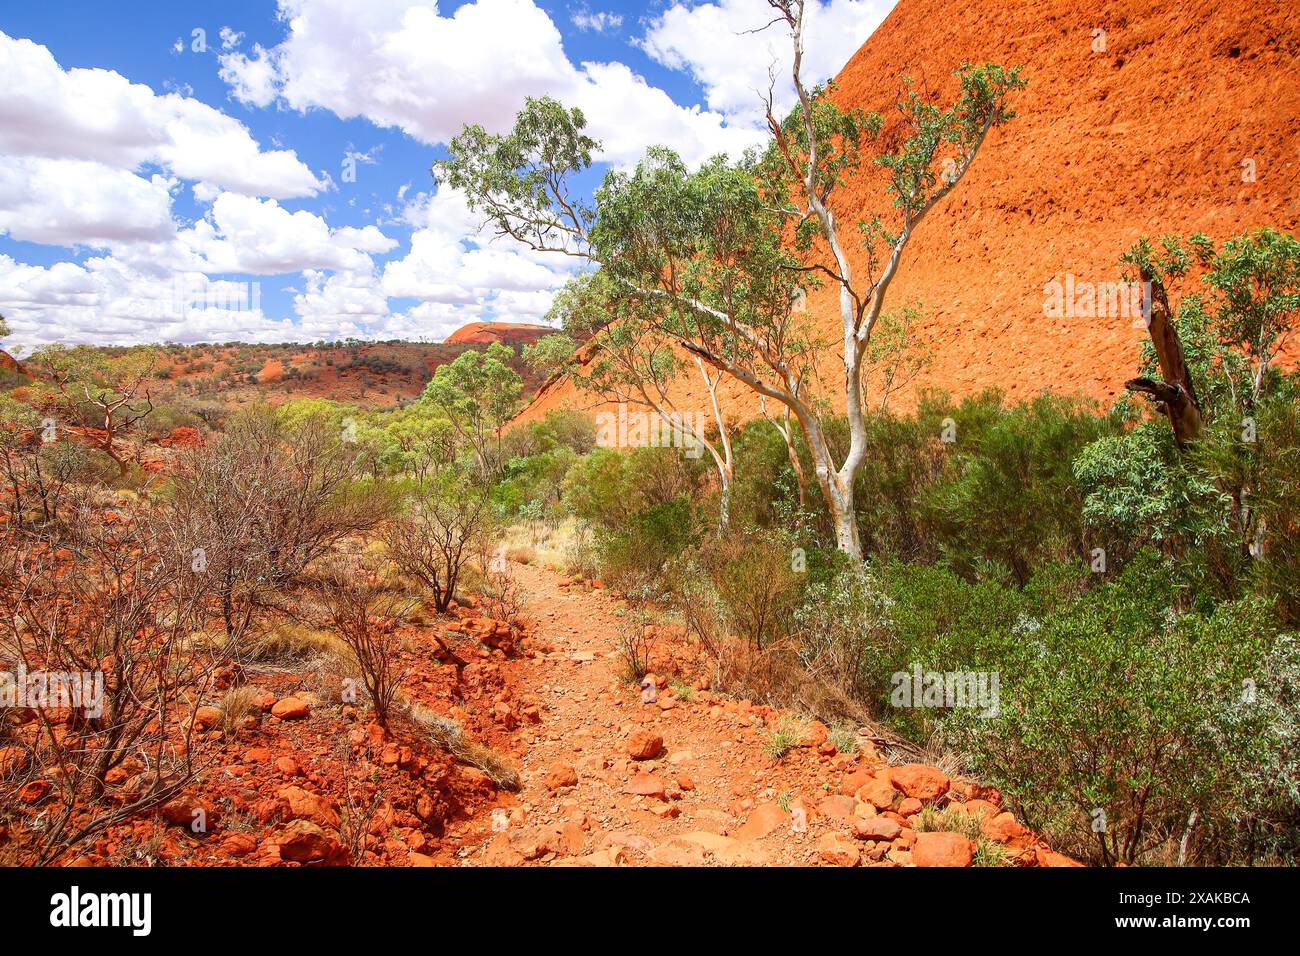 Valley of the Winds trail in Kata Tjuta aka the Olgas, large domed rock formations in Northern Territory, Central Australia - Sandstone inselberg sacr Stock Photo